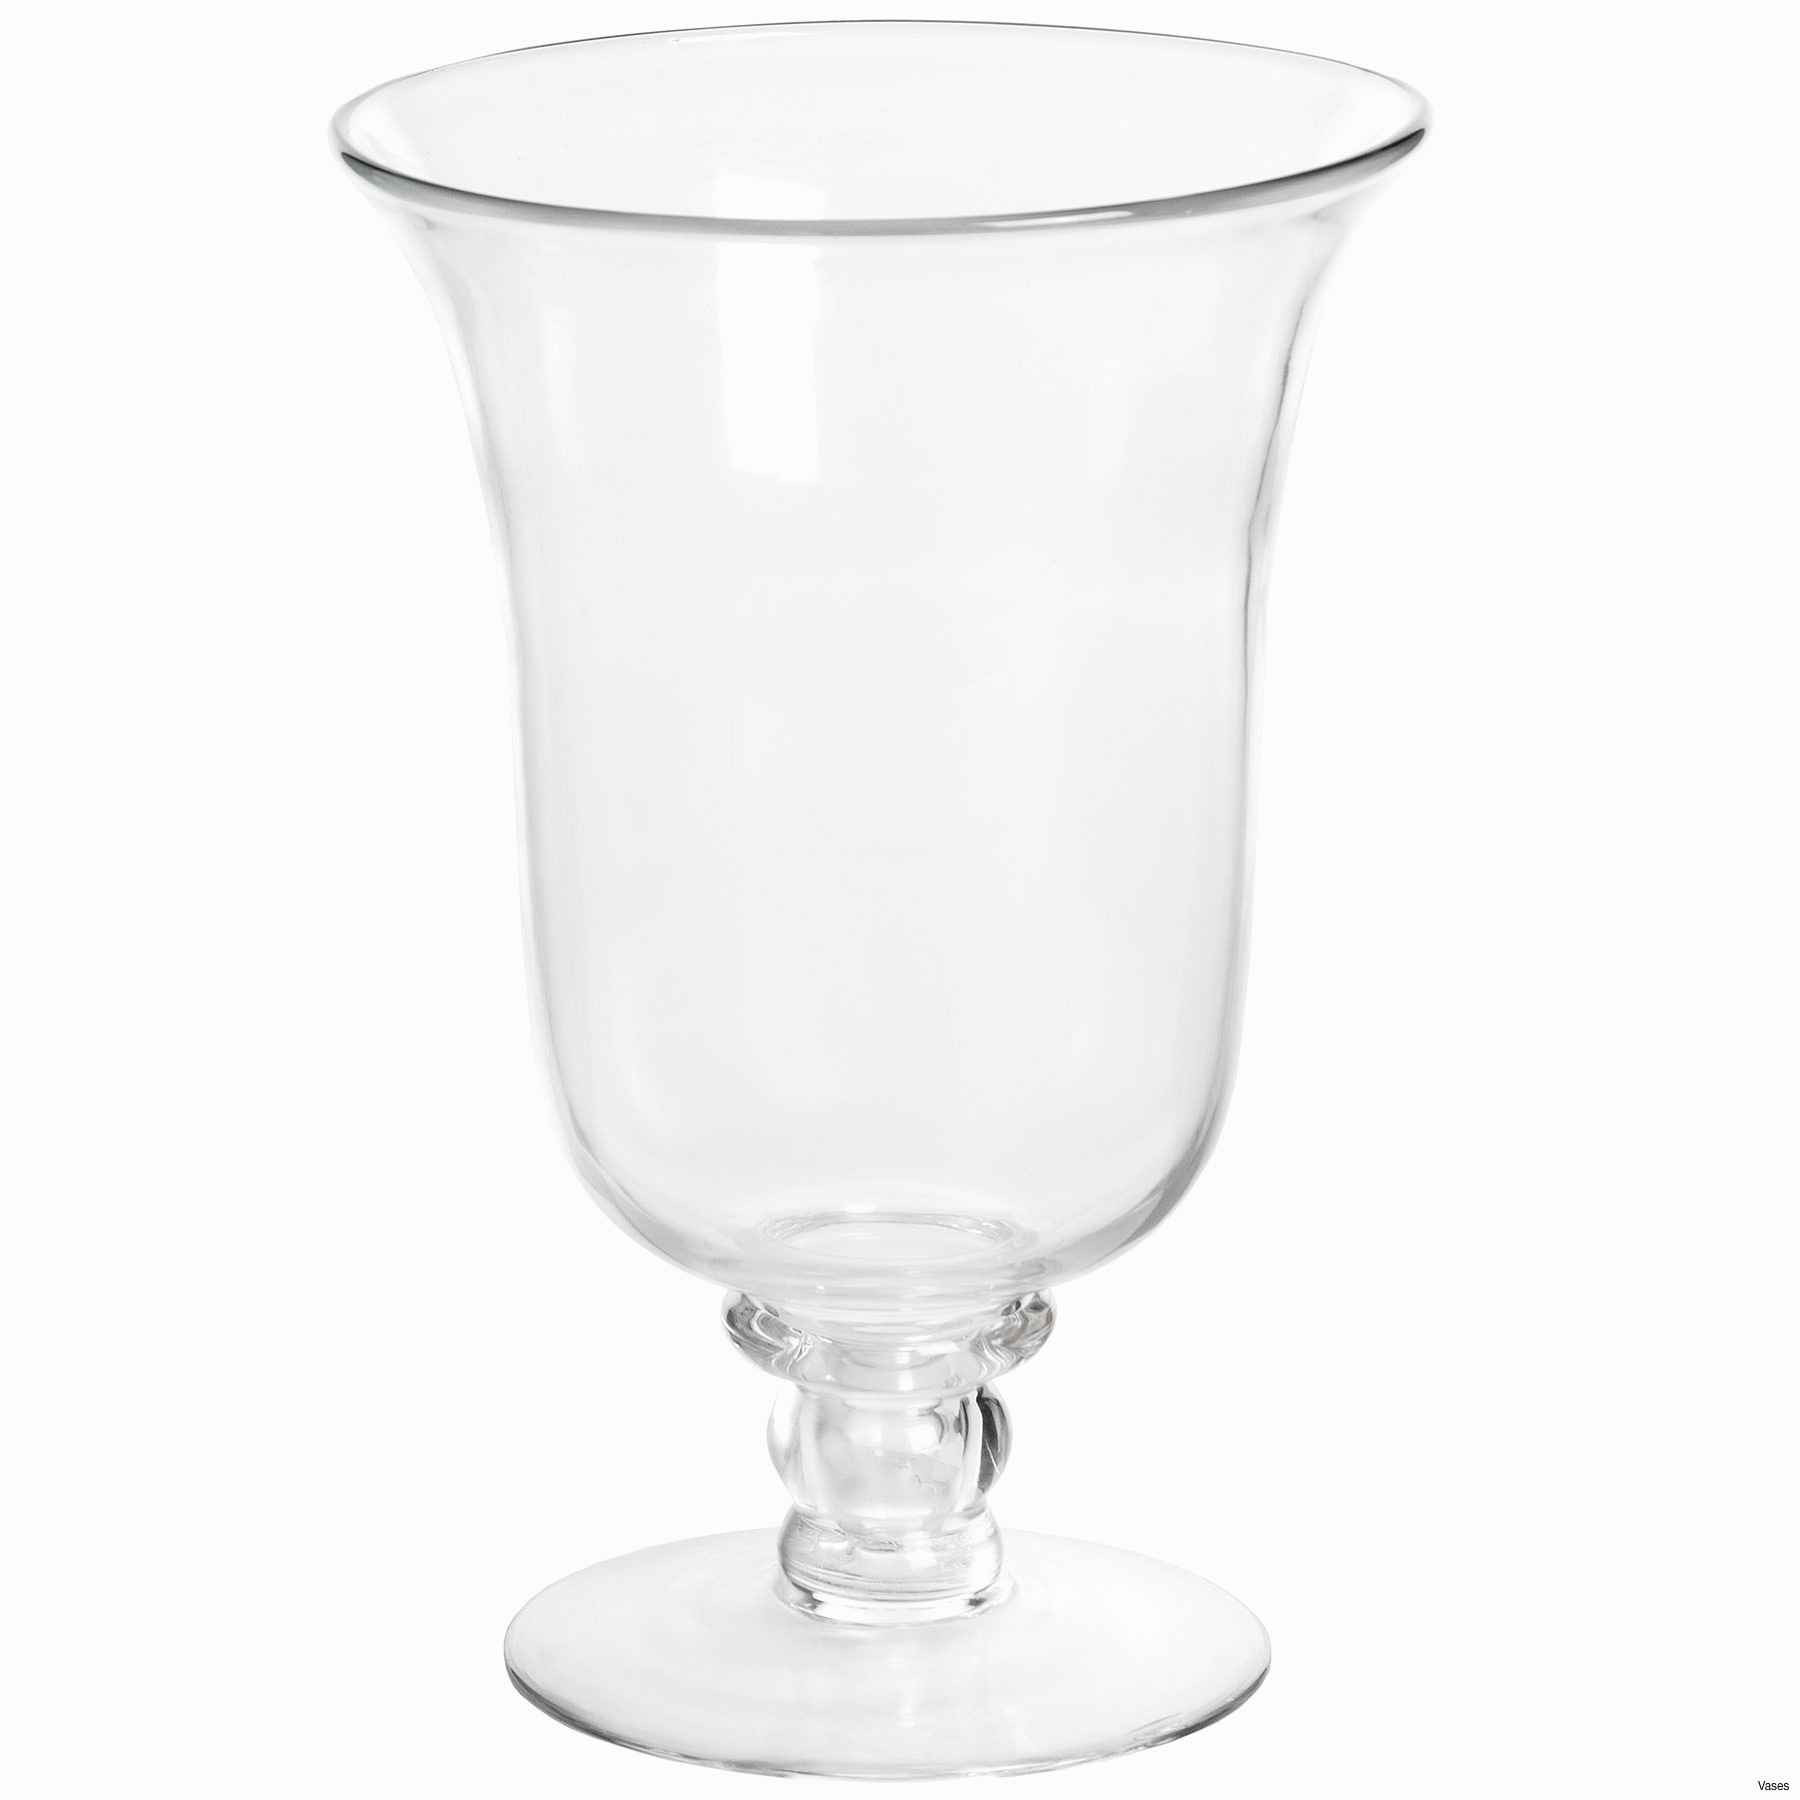 19 Wonderful Cheap Crystal Vases 2024 free download cheap crystal vases of candle stands wholesale lovely faux crystal candle holders alive in candle stands wholesale lovely faux crystal candle holders alive vases gold tall jpgi 0d cheap in